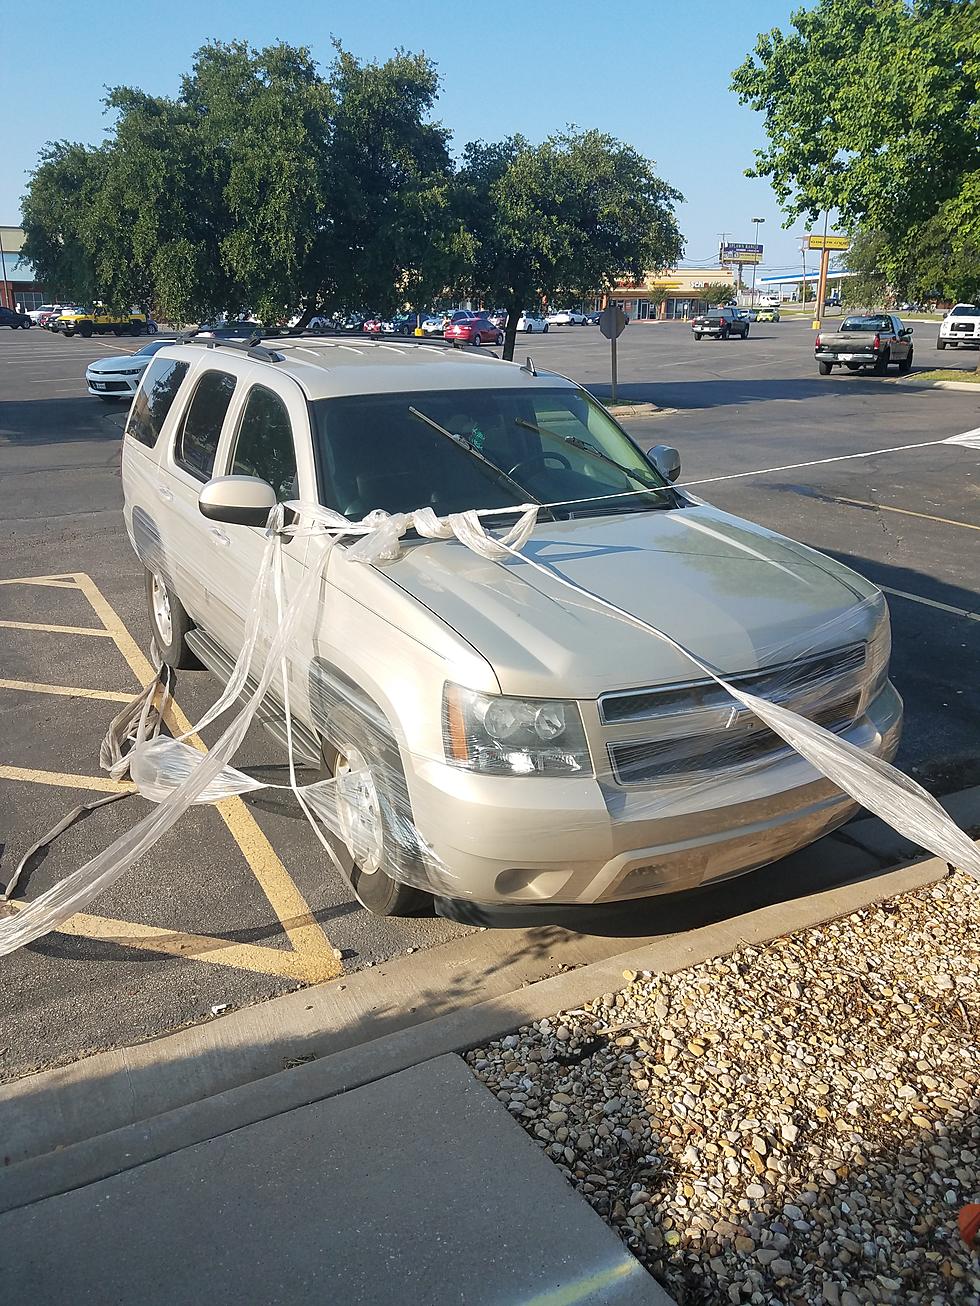 Have You Seen This Shrink Wrapped SUV In Killeen?